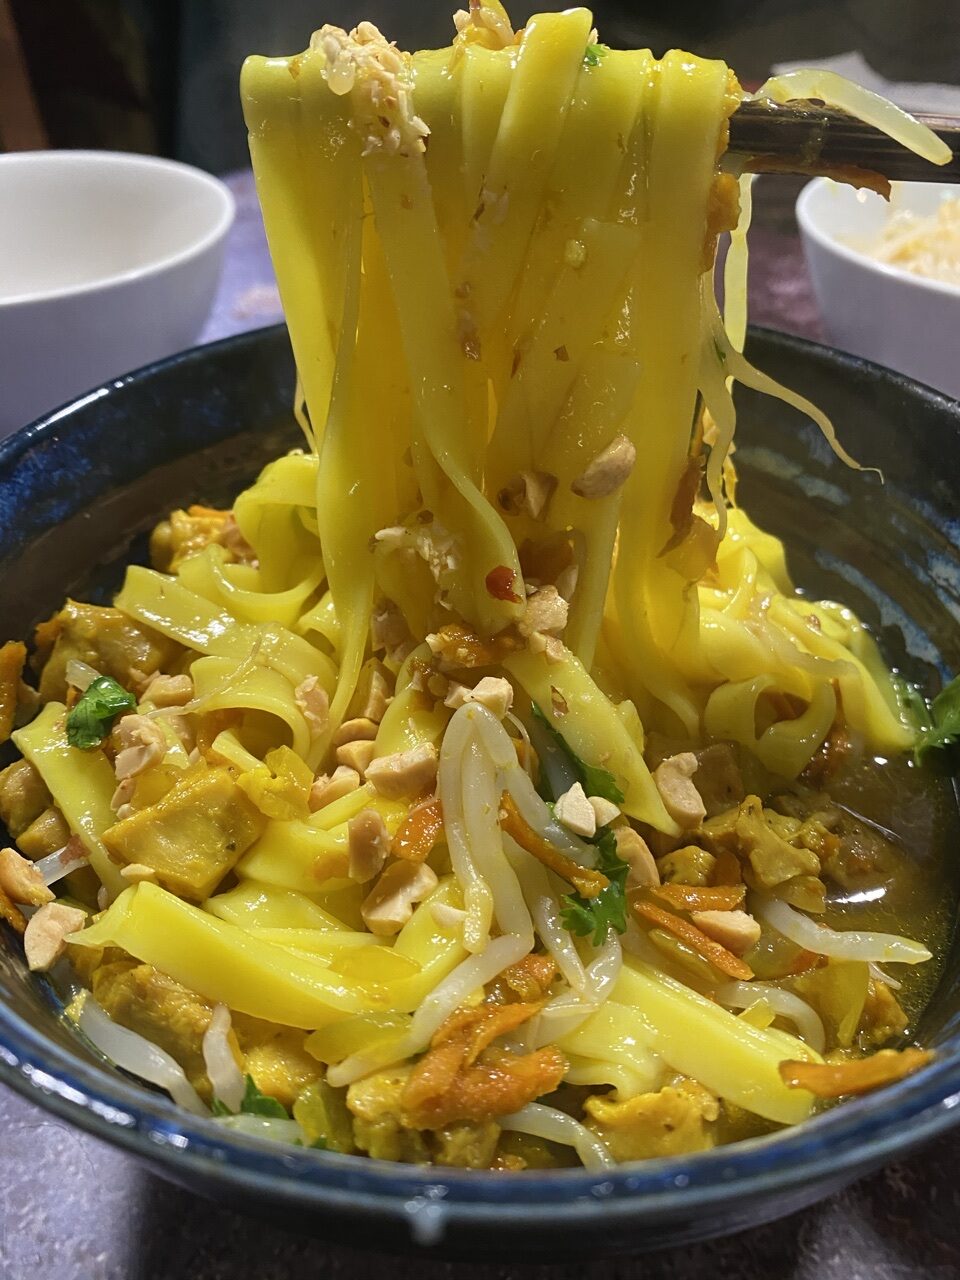 8189C1D2 FAF2 442D A7A7 9937A99BE9D3 e1604175026993 - Mì Quàng Gà- Vietnamese Turmeric Noodles with Chicken